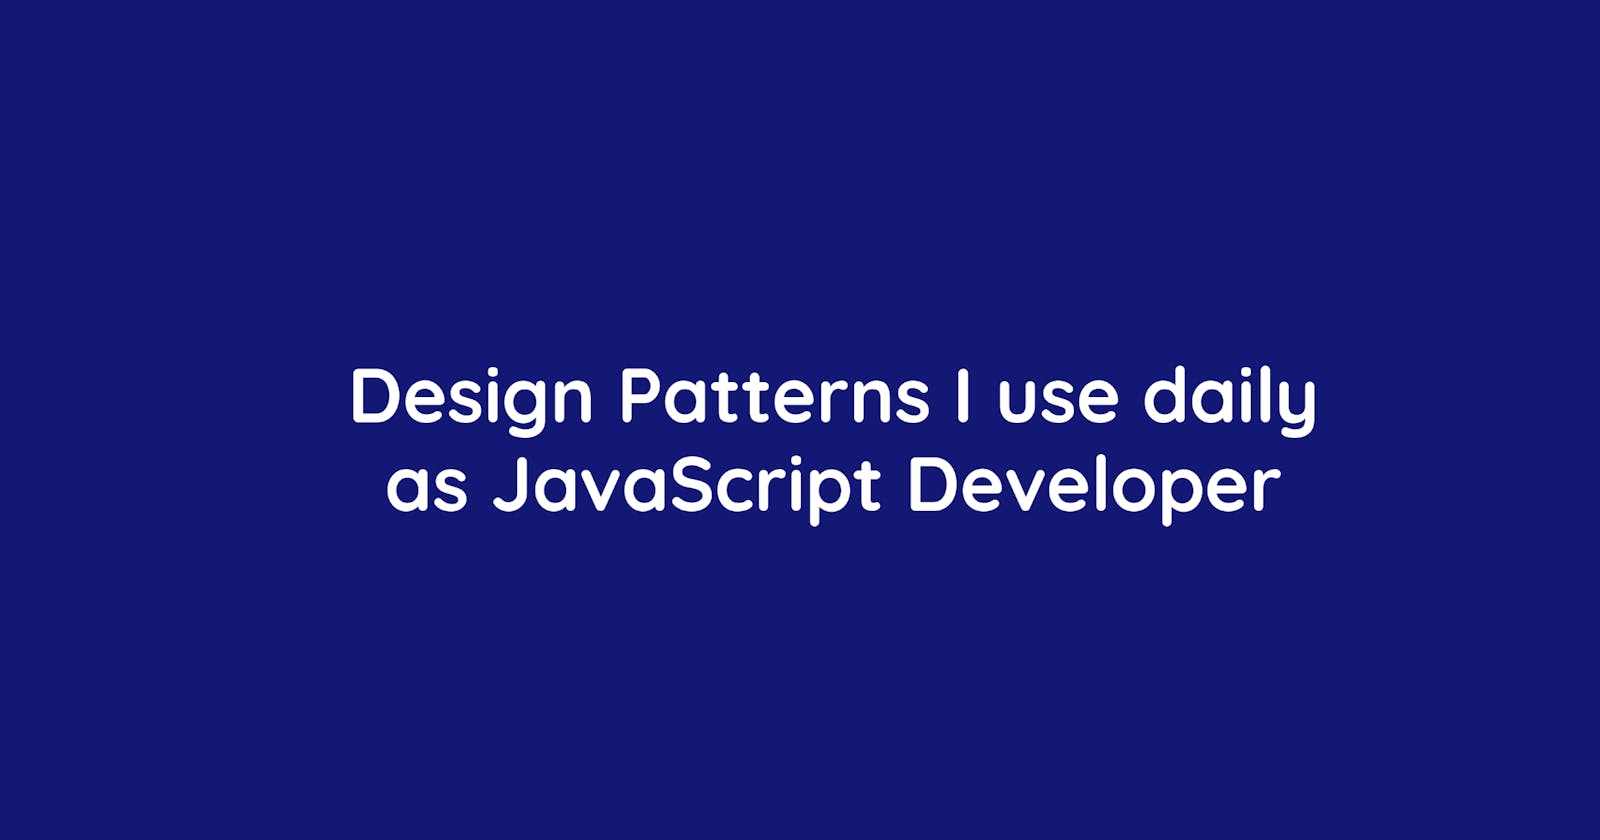 Common Design Patterns I use everyday as a JavaScript developer